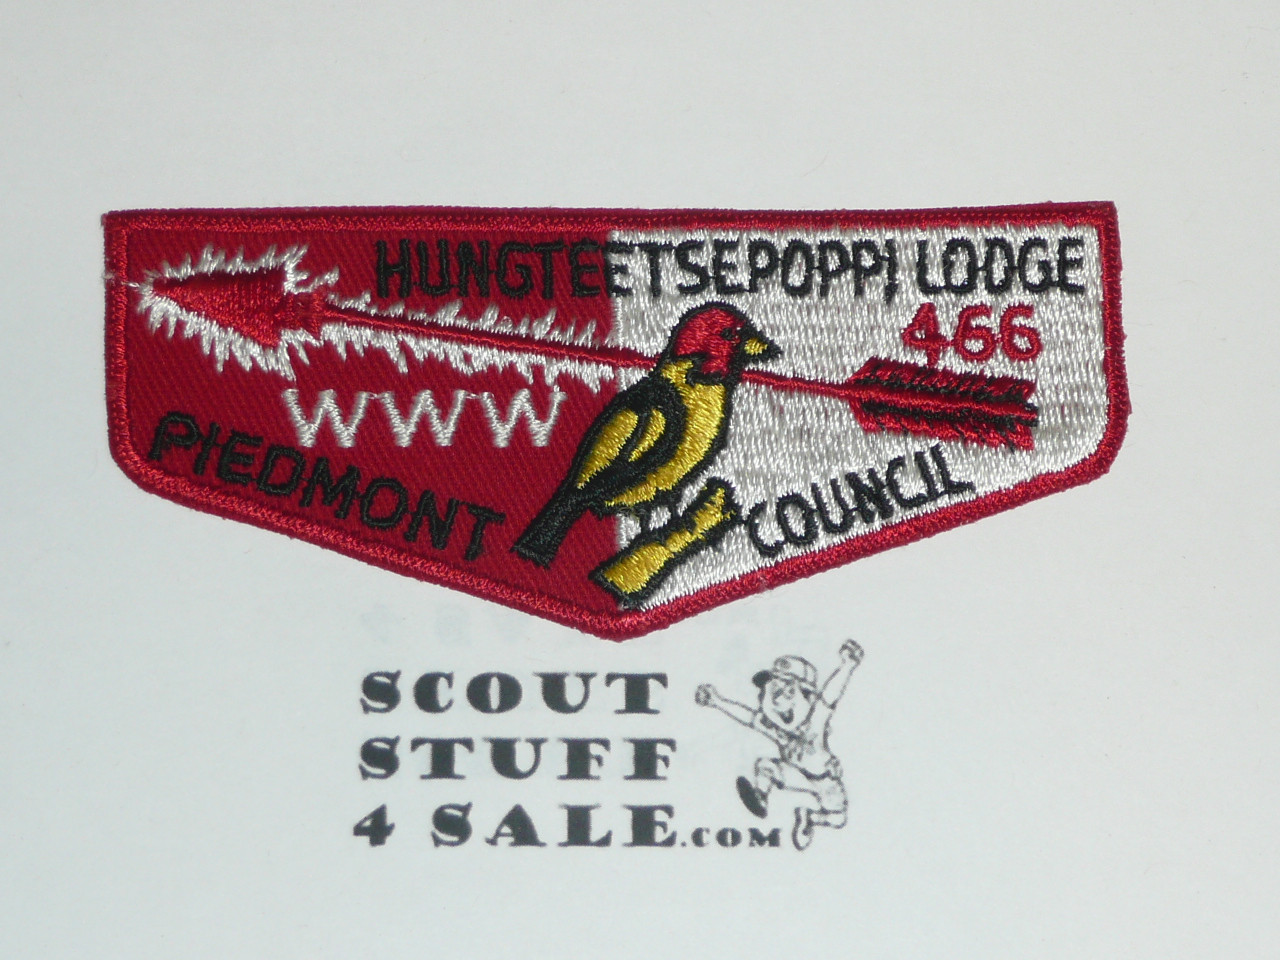 Order of the Arrow Lodge #466 Hungteetsepoppi f1 First Flap Patch